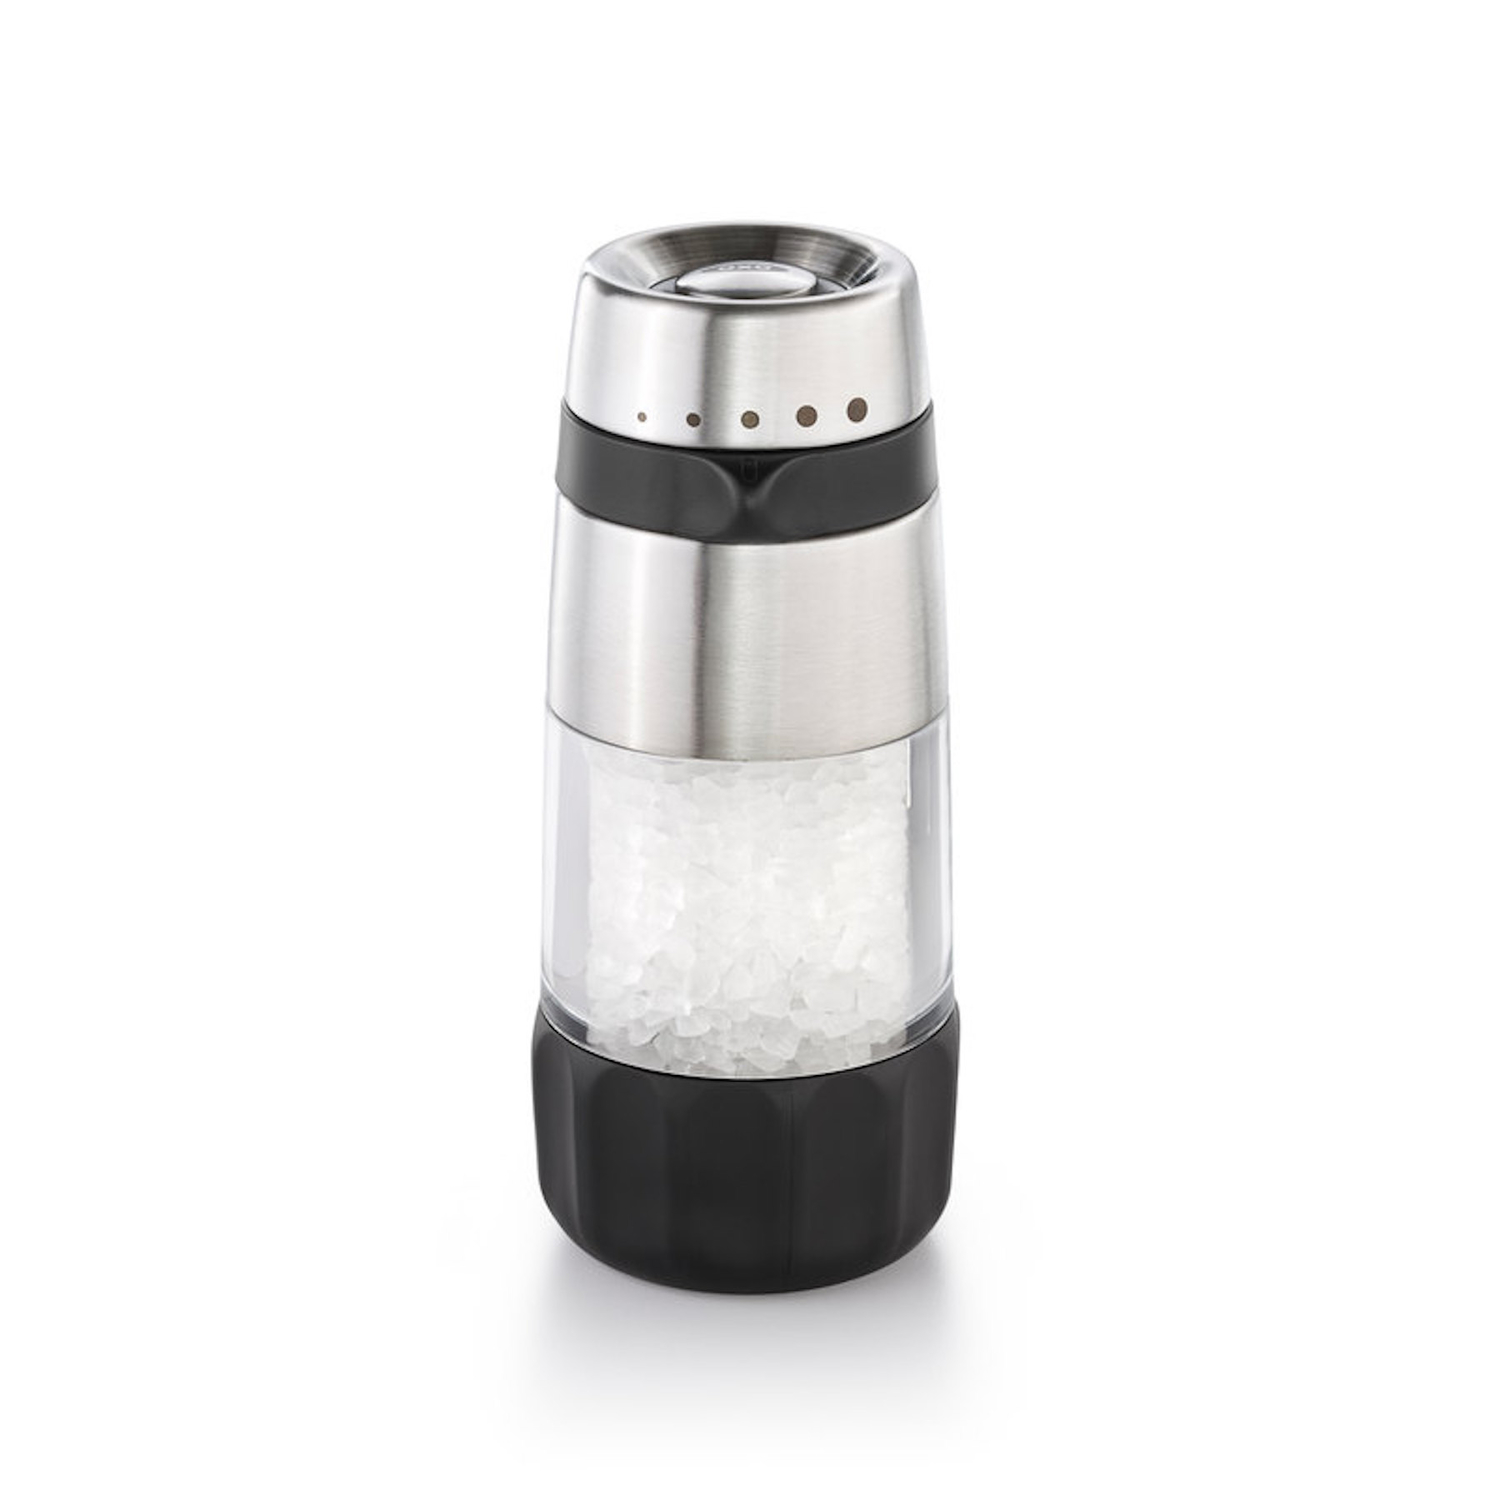 Photos - Other Accessories Oxo Good Grips Black Plastic/Stainless Steel Salt Grinder 4.76 oz 1140600 